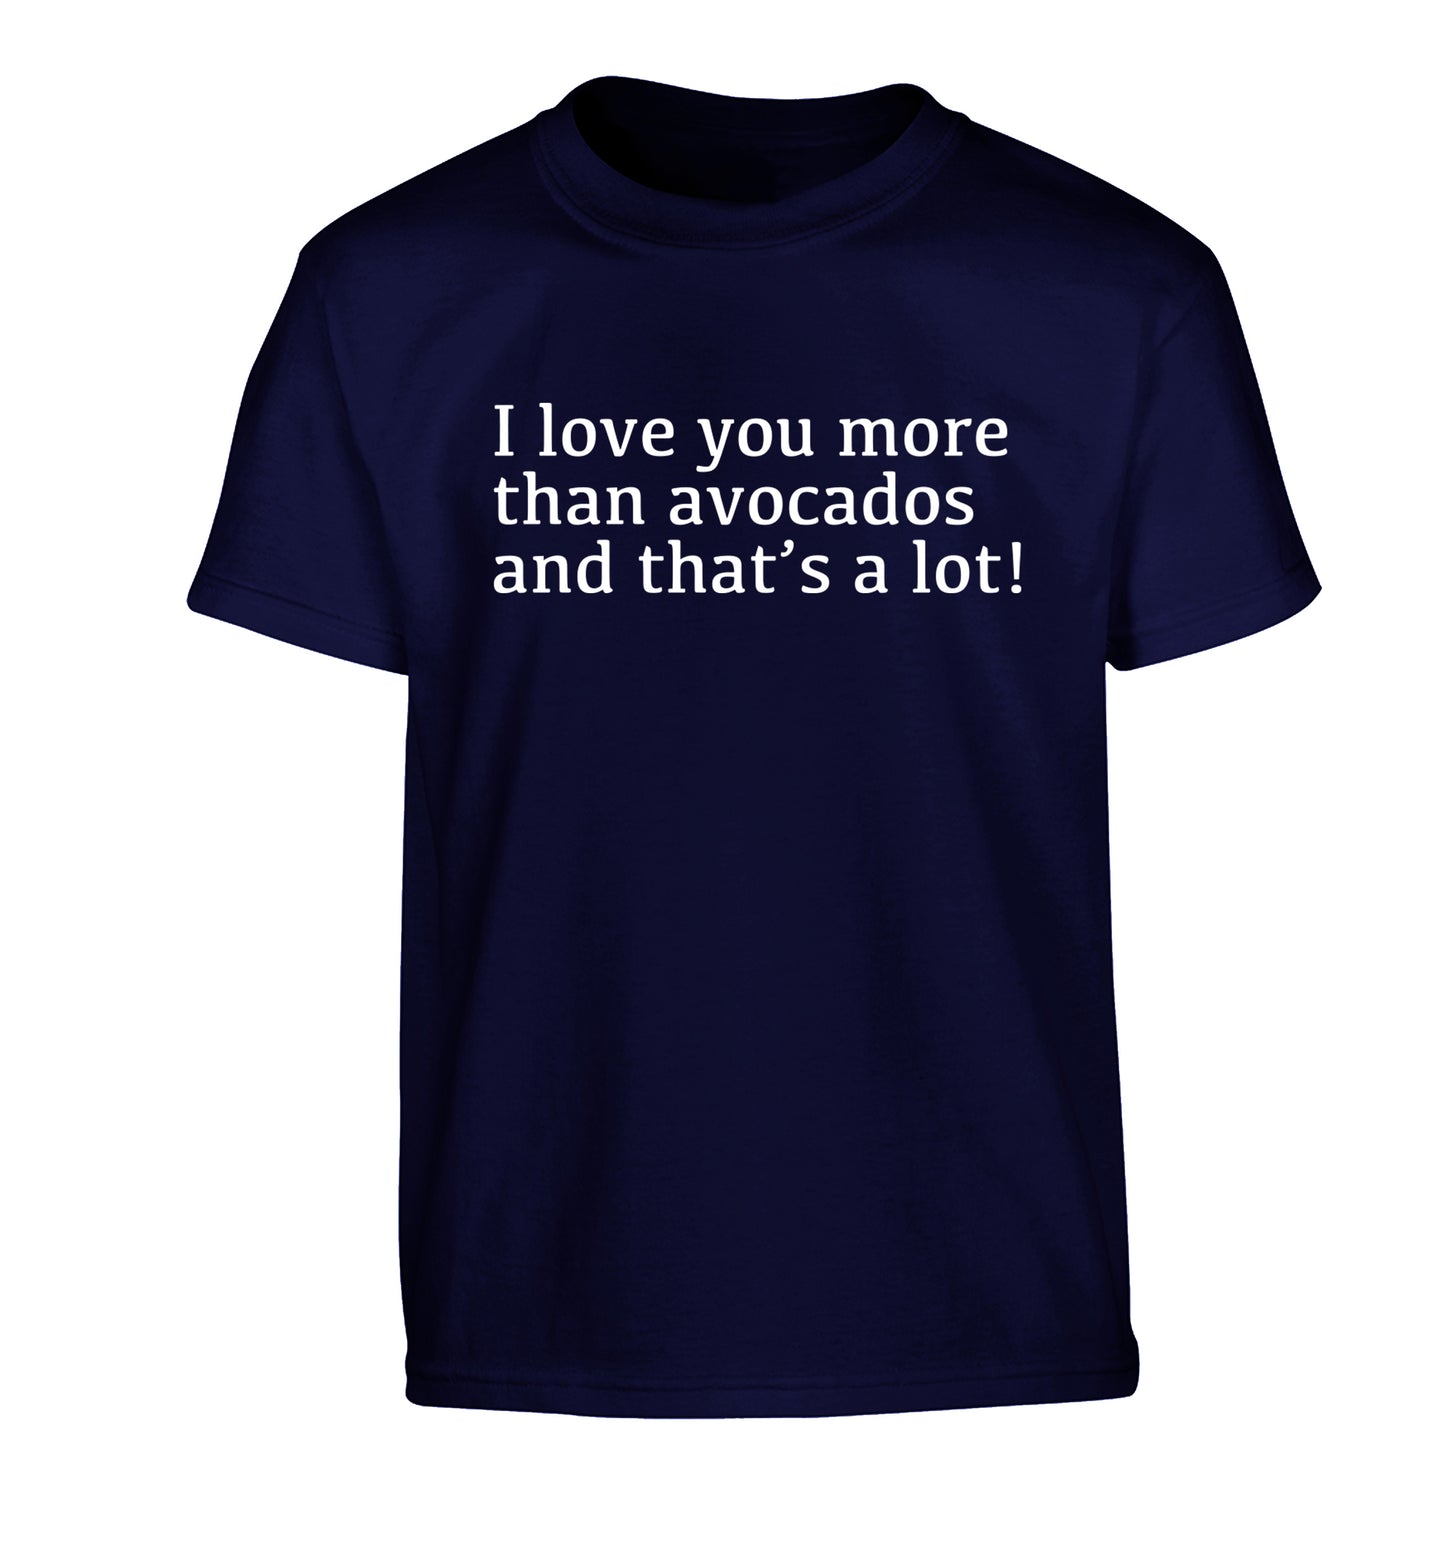 I love you more than avocados and that's a lot Children's navy Tshirt 12-14 Years